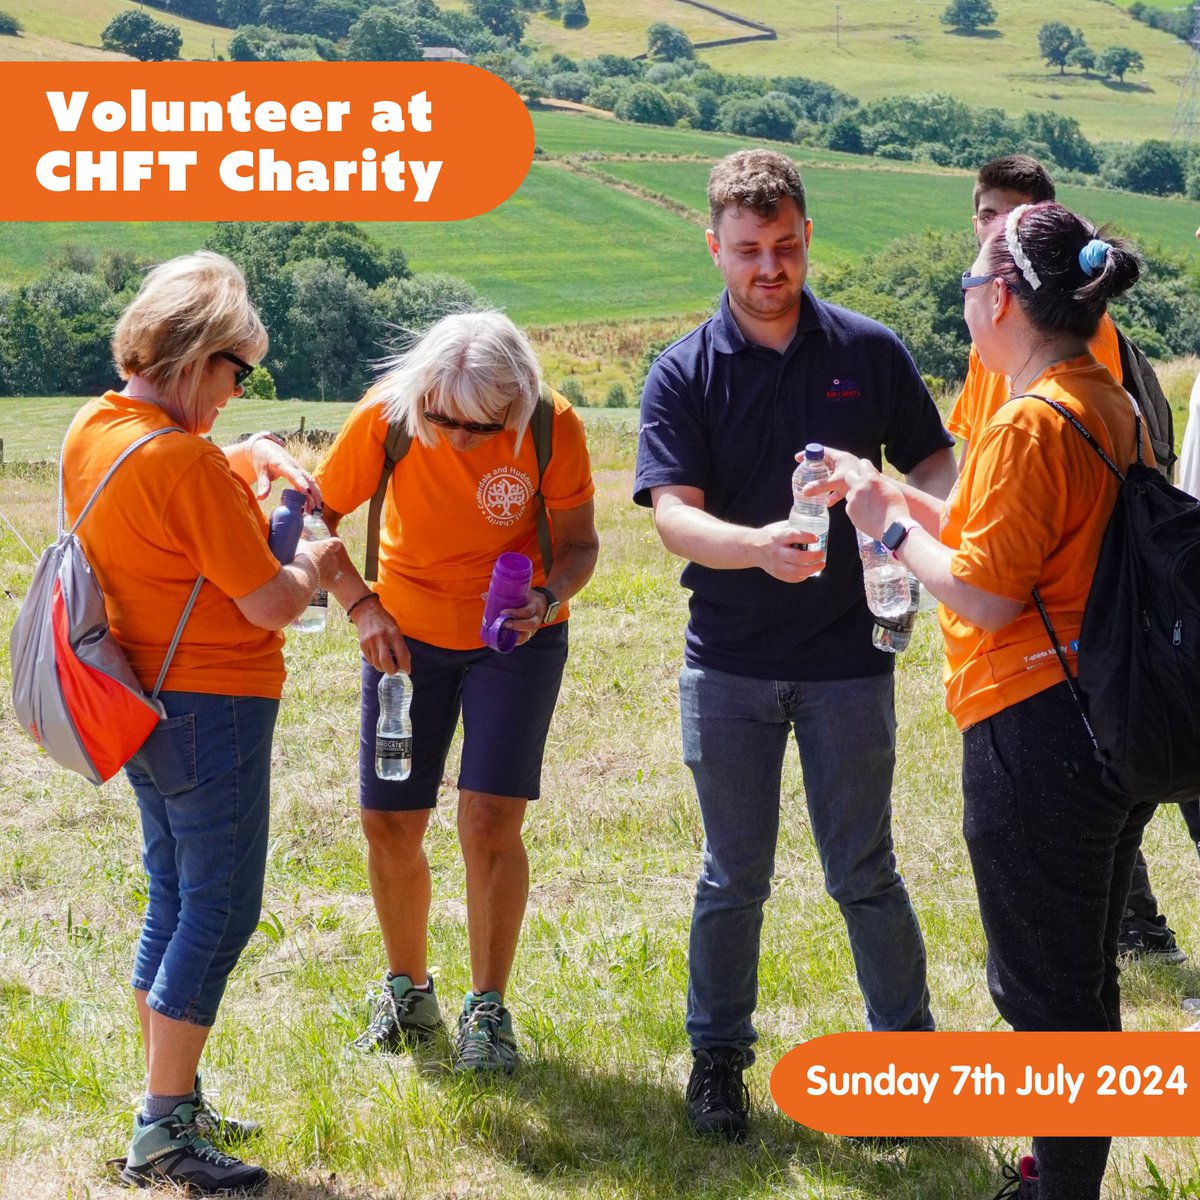 #CHFTCharity are recruiting individuals & groups for the following roles at this years #BigHospitalWalk: 💃Marshalls 👏Cheer stations 🎂End of event activities Please email chftfundraising@cht.nhs.uk if you are interested. A little of your time will make an amazing difference🧡